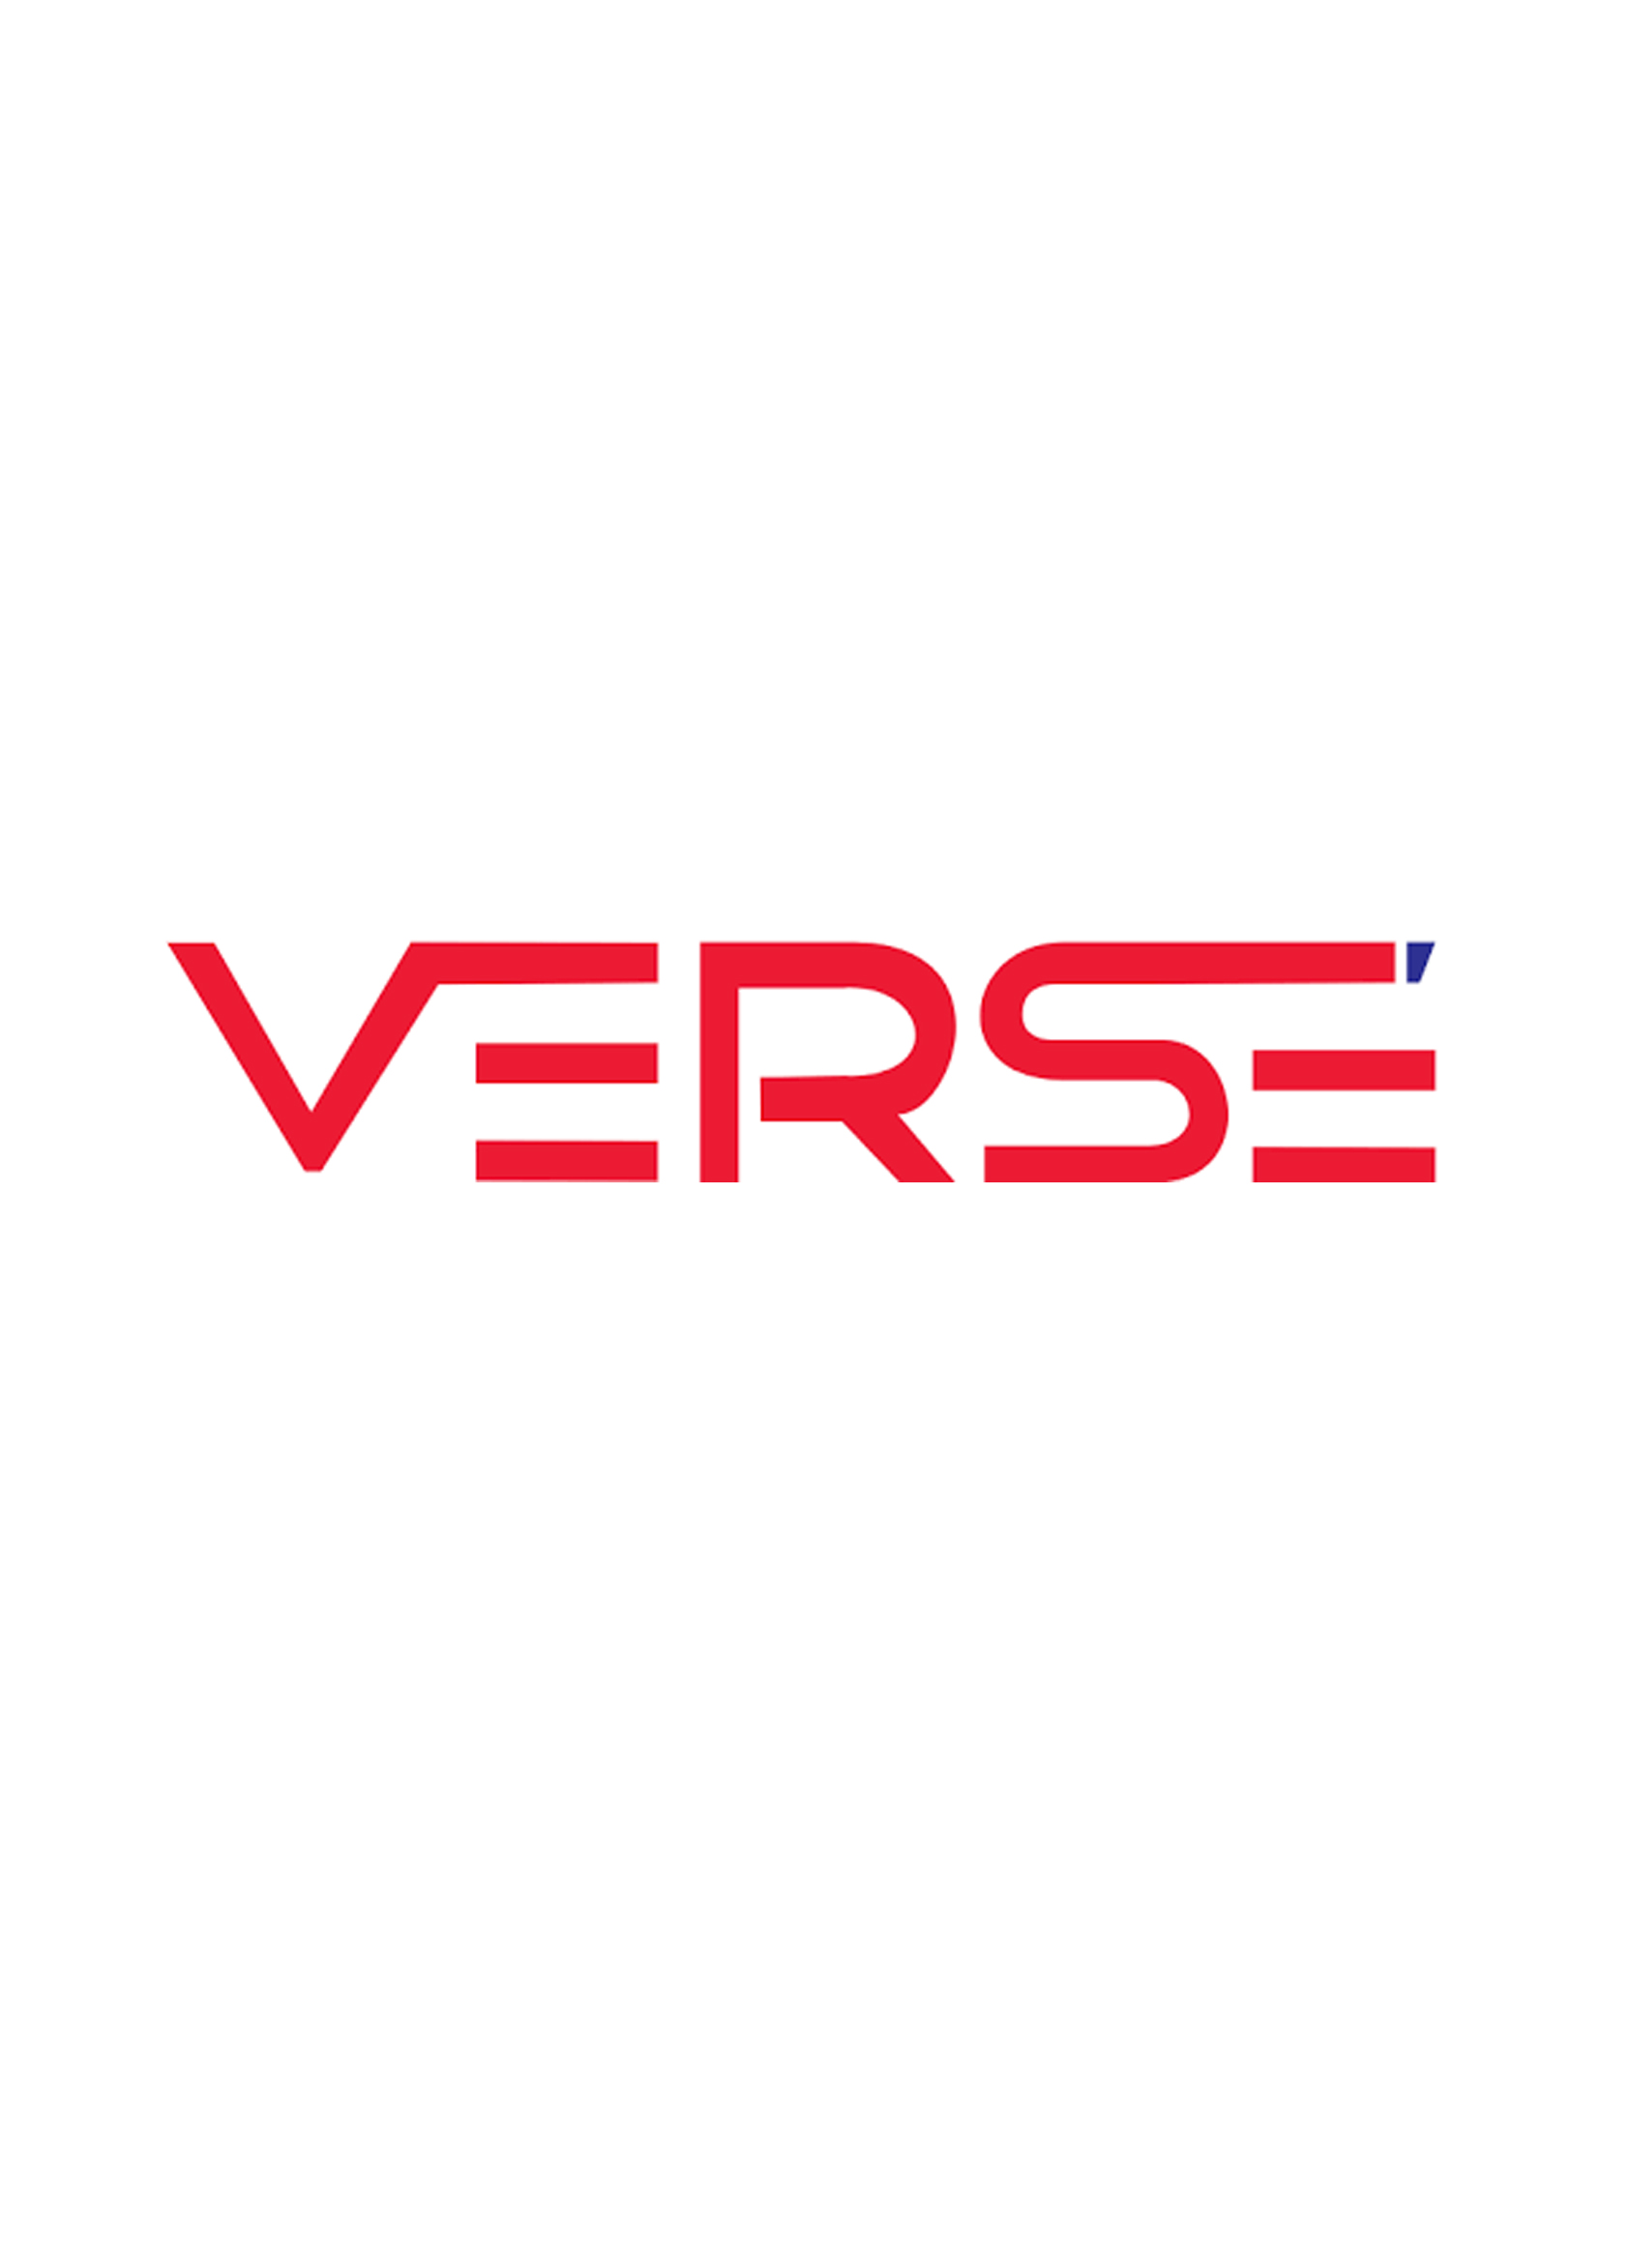 A picture displaying logo of VerSe Innovation